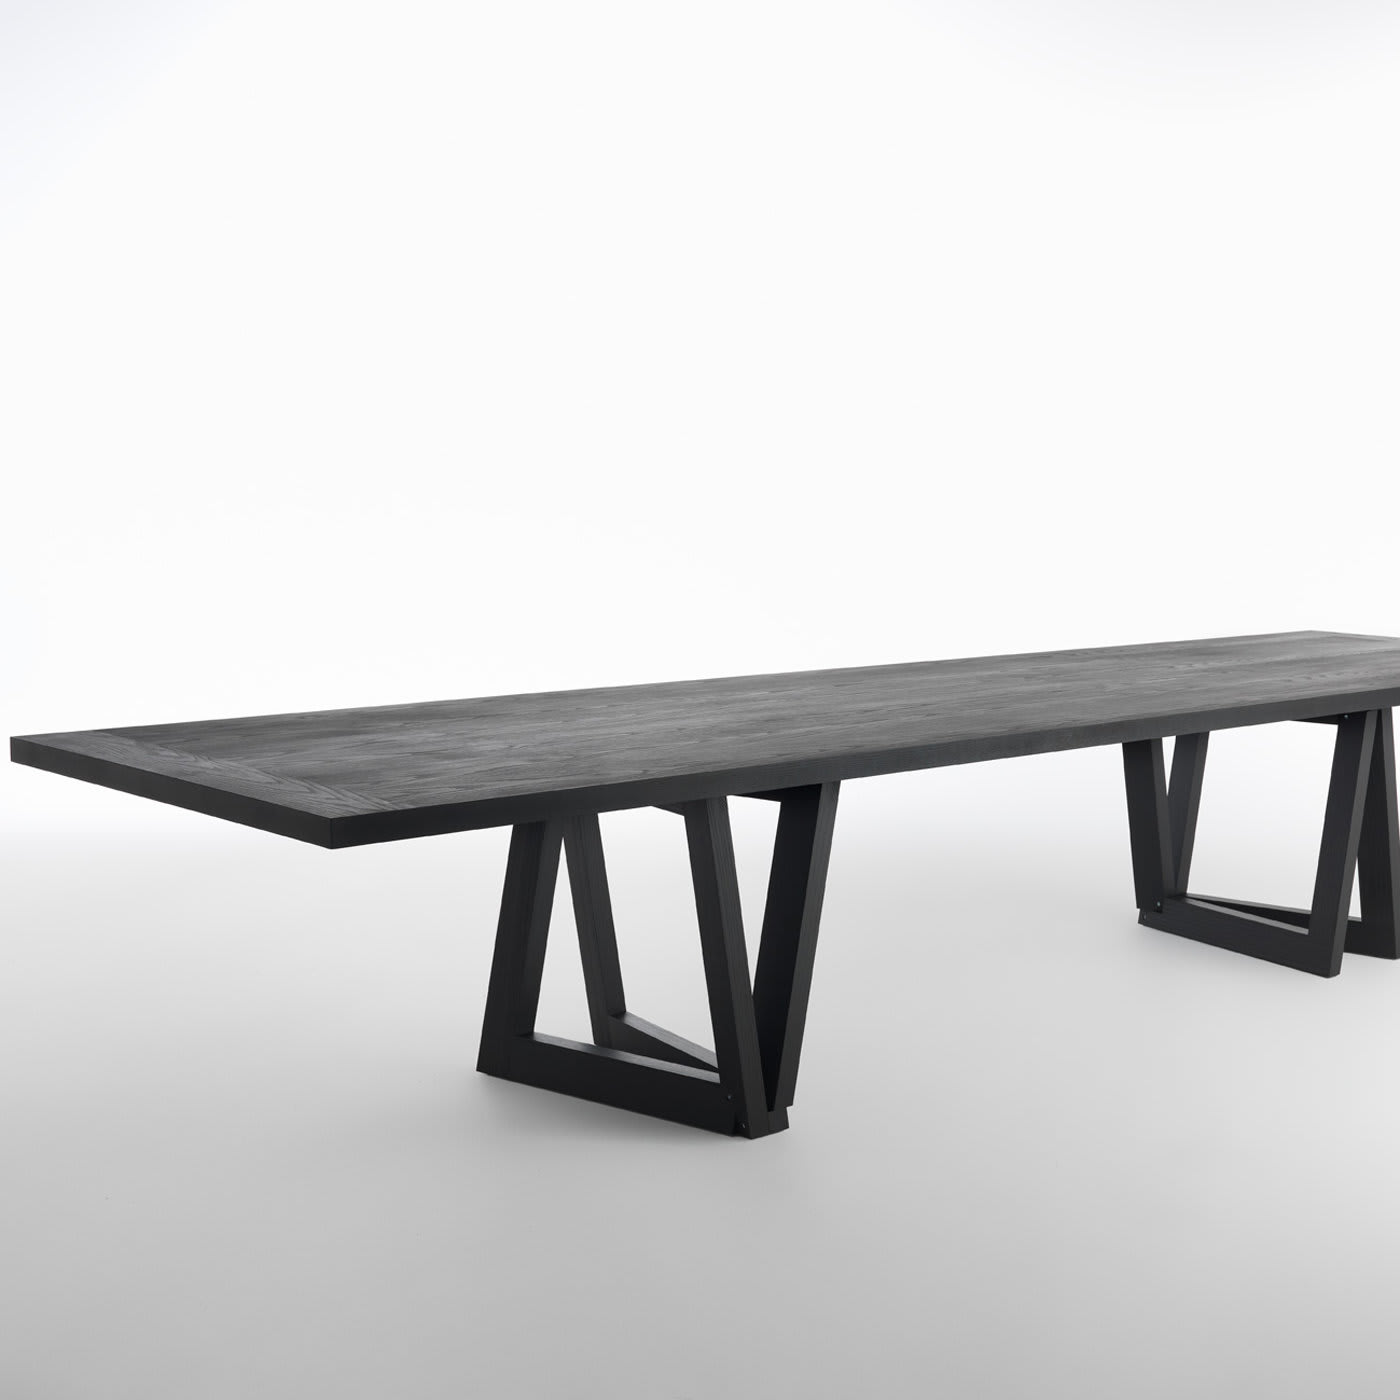 QuaDror 03 Dining Table by Dror - Horm